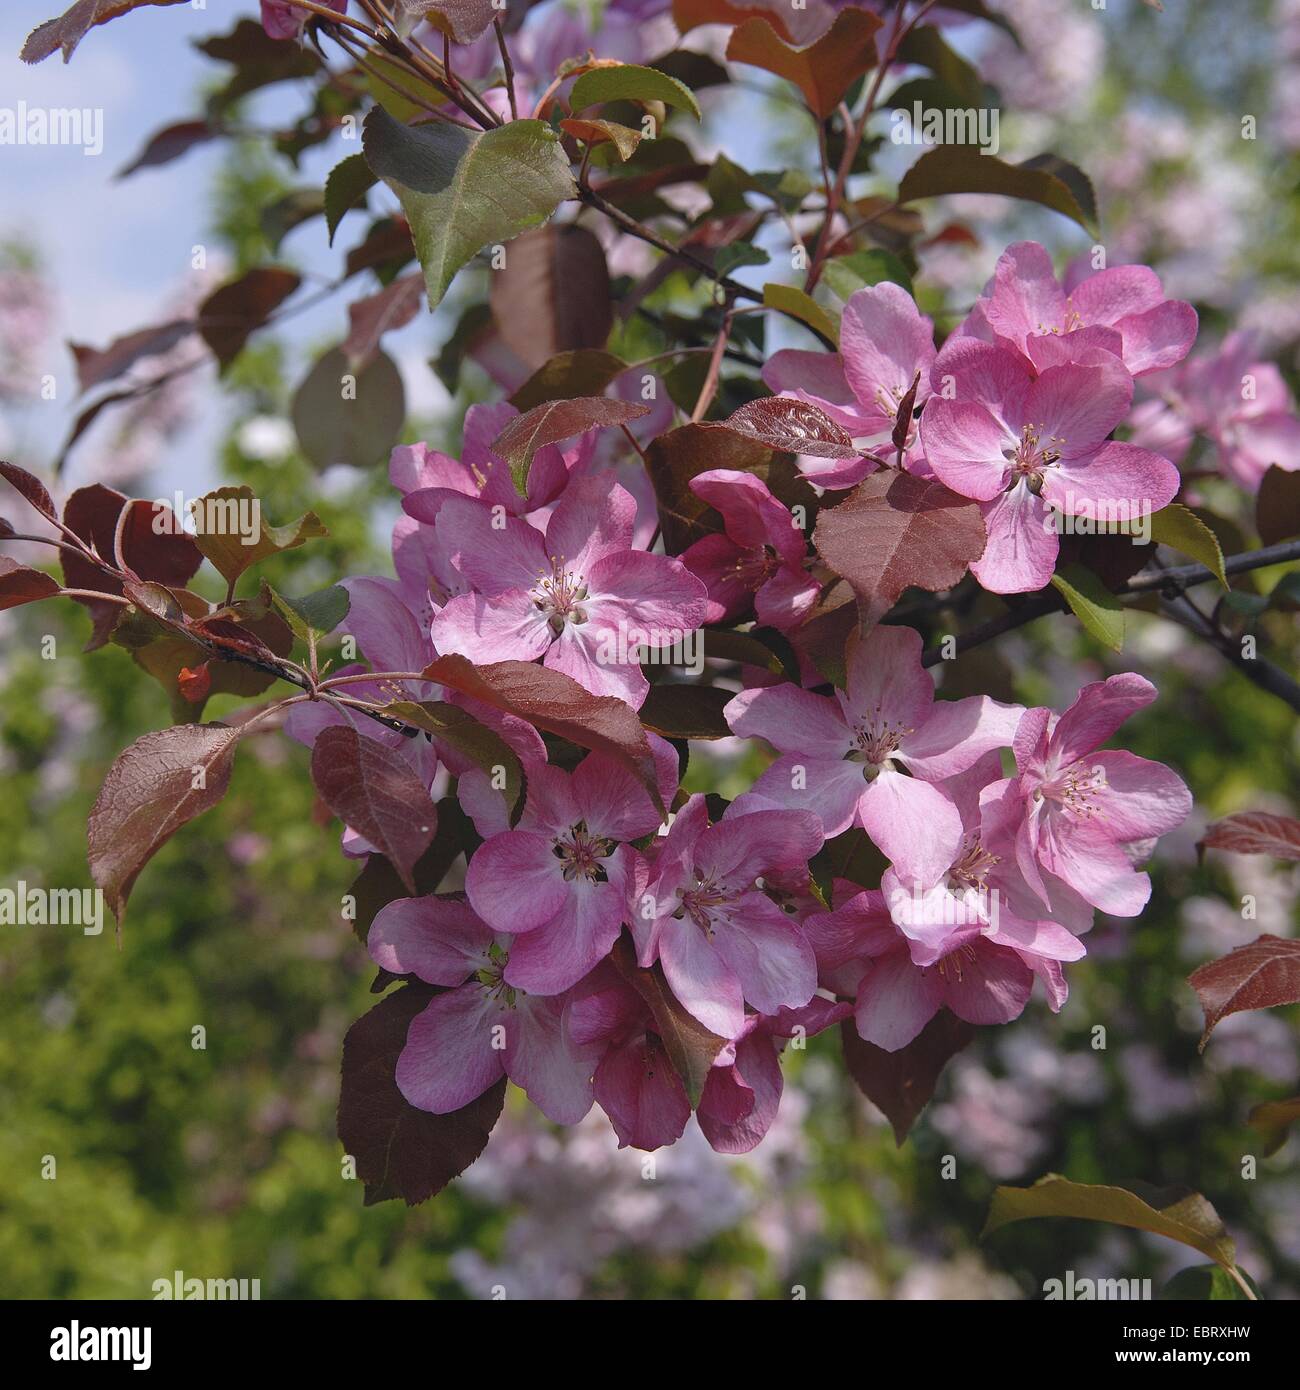 Crab apple (Malus 'Rudolph', Malus Rudolph), cultivar Rudolph, blooming Stock Photo